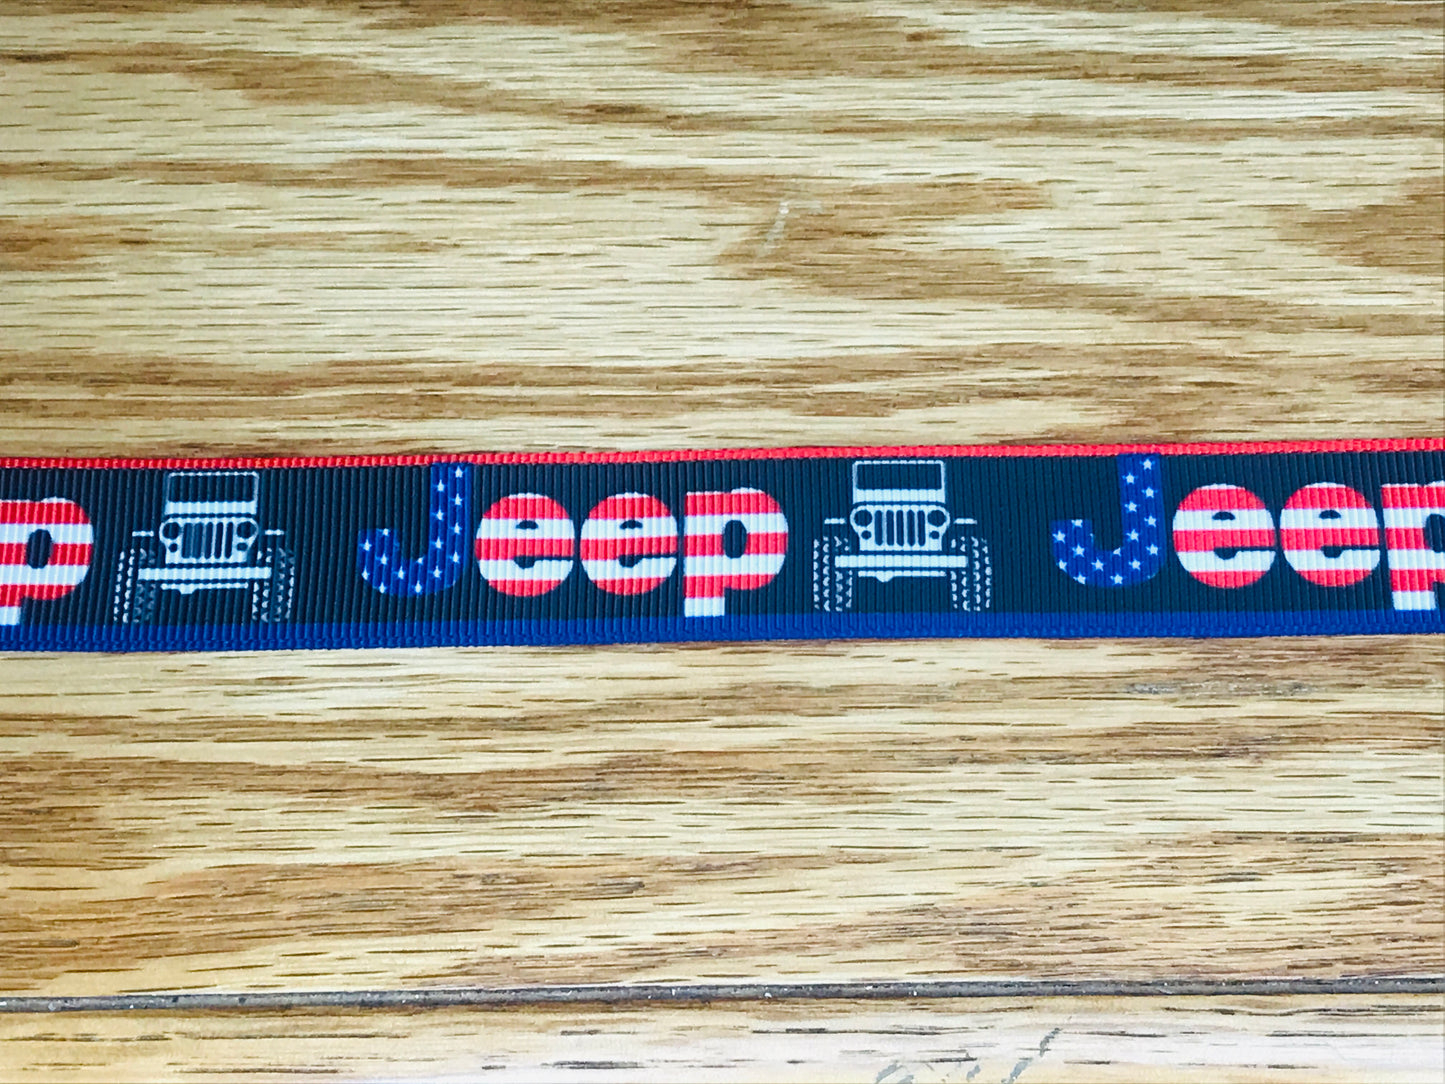 7/8" Wide American Automotive Manufacturer Jeep Wrangler Red White & Blue Grosgrain Ribbon